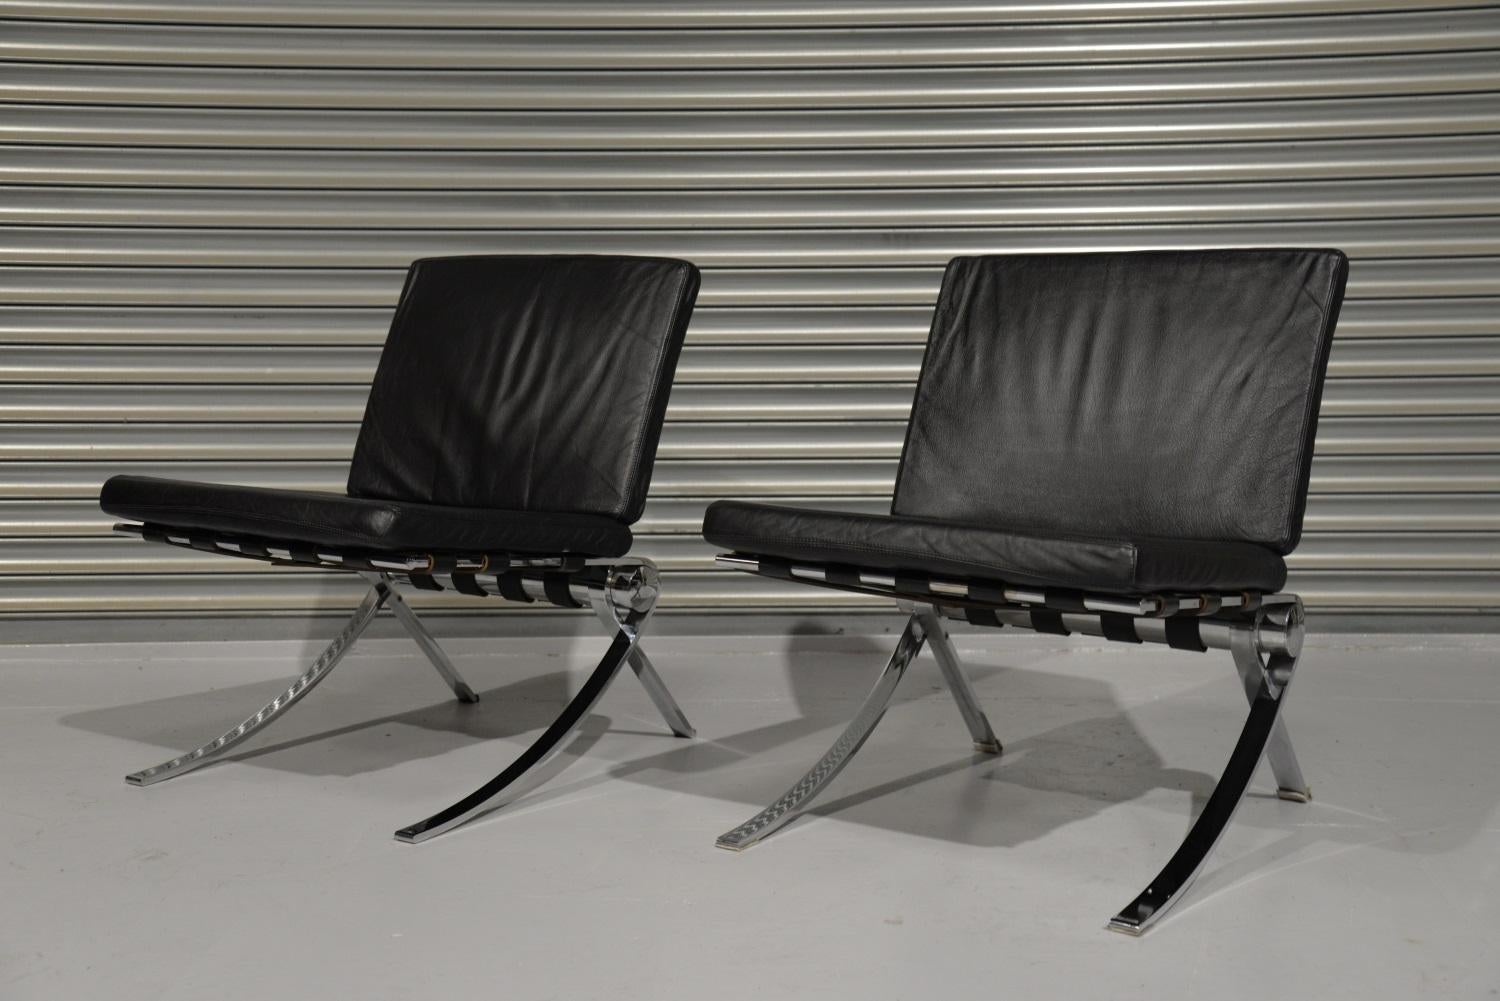 Discounted airfreight for our US and International customers (from 2 weeks door to door)

We are delighted to bring to you an extremely rare pair of Padaro lounge chairs by designer Paul Tuttle for Strassle of Switzerland. Hand built to extremely